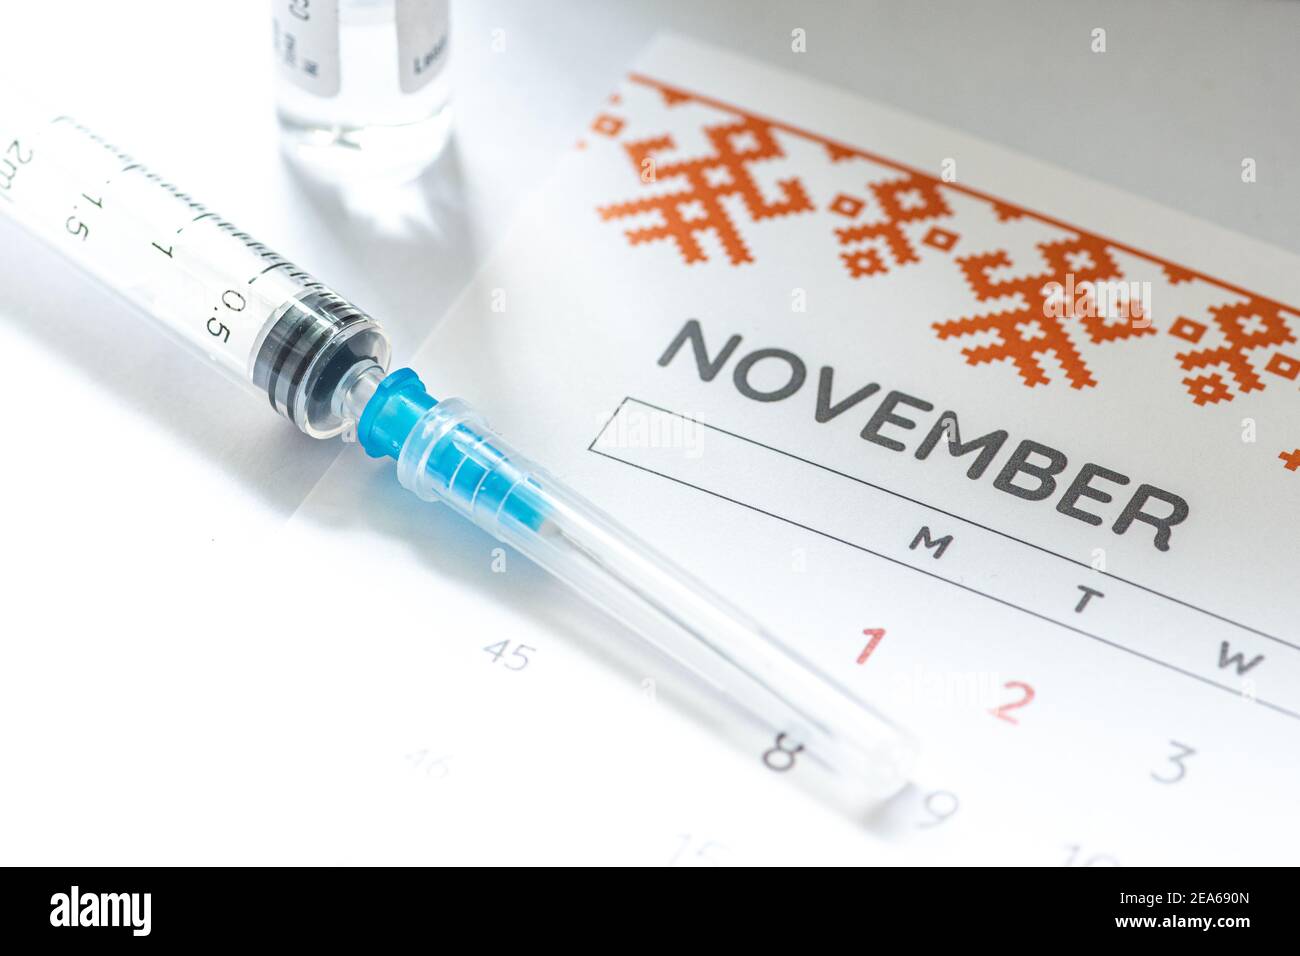 Syringe, glass vial or phial and calendar with month of November on a white table ready to be used. Covid or Coronavirus vaccine background, close up Stock Photo